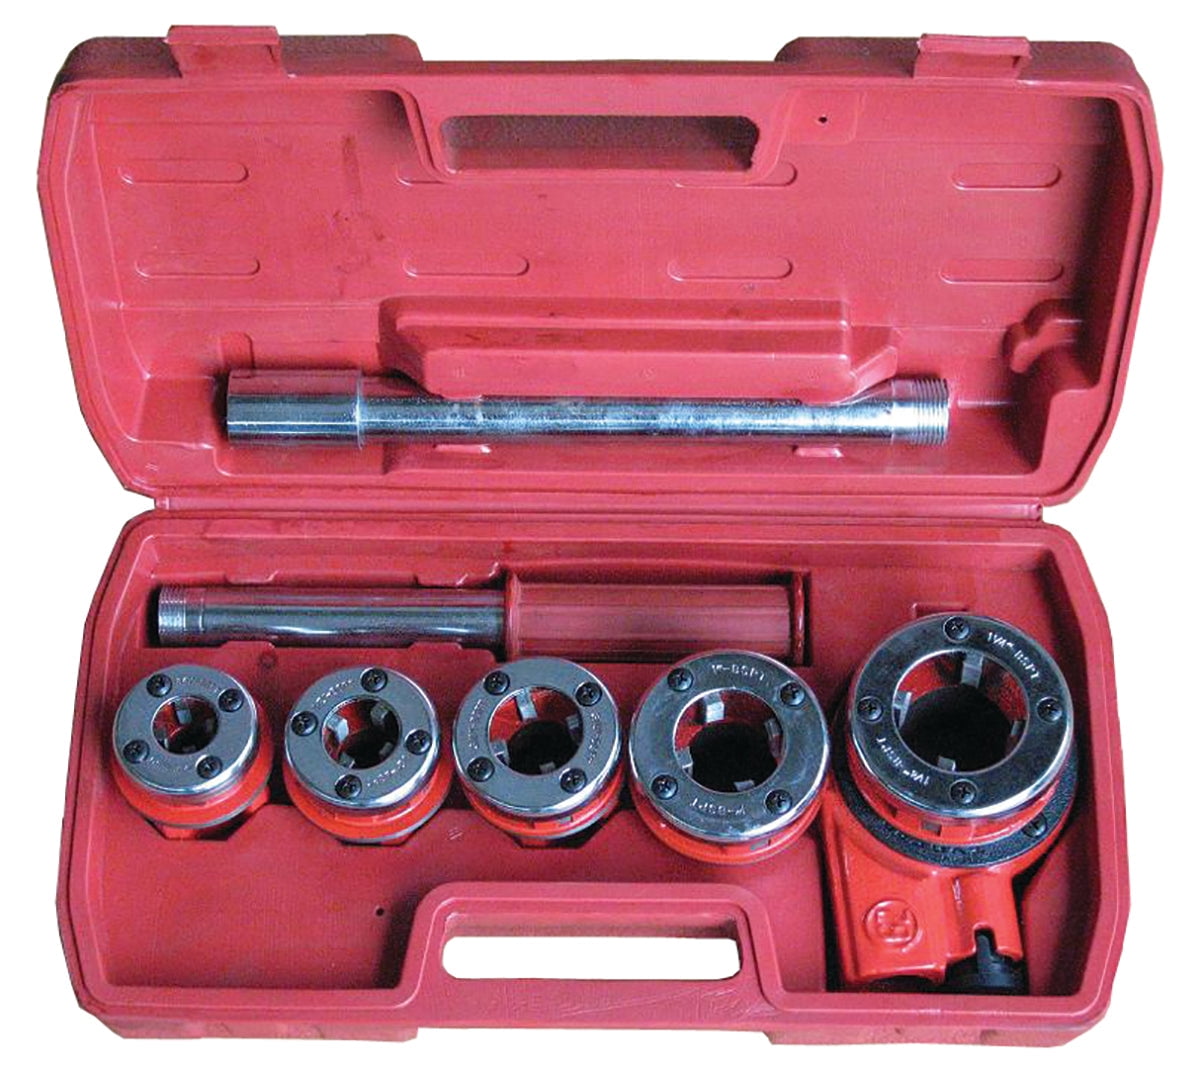 Details about   New Pipe Threader Ratchet Type w/ 5 Stock Dies and Pipe Cutter Plumbing Tools US 